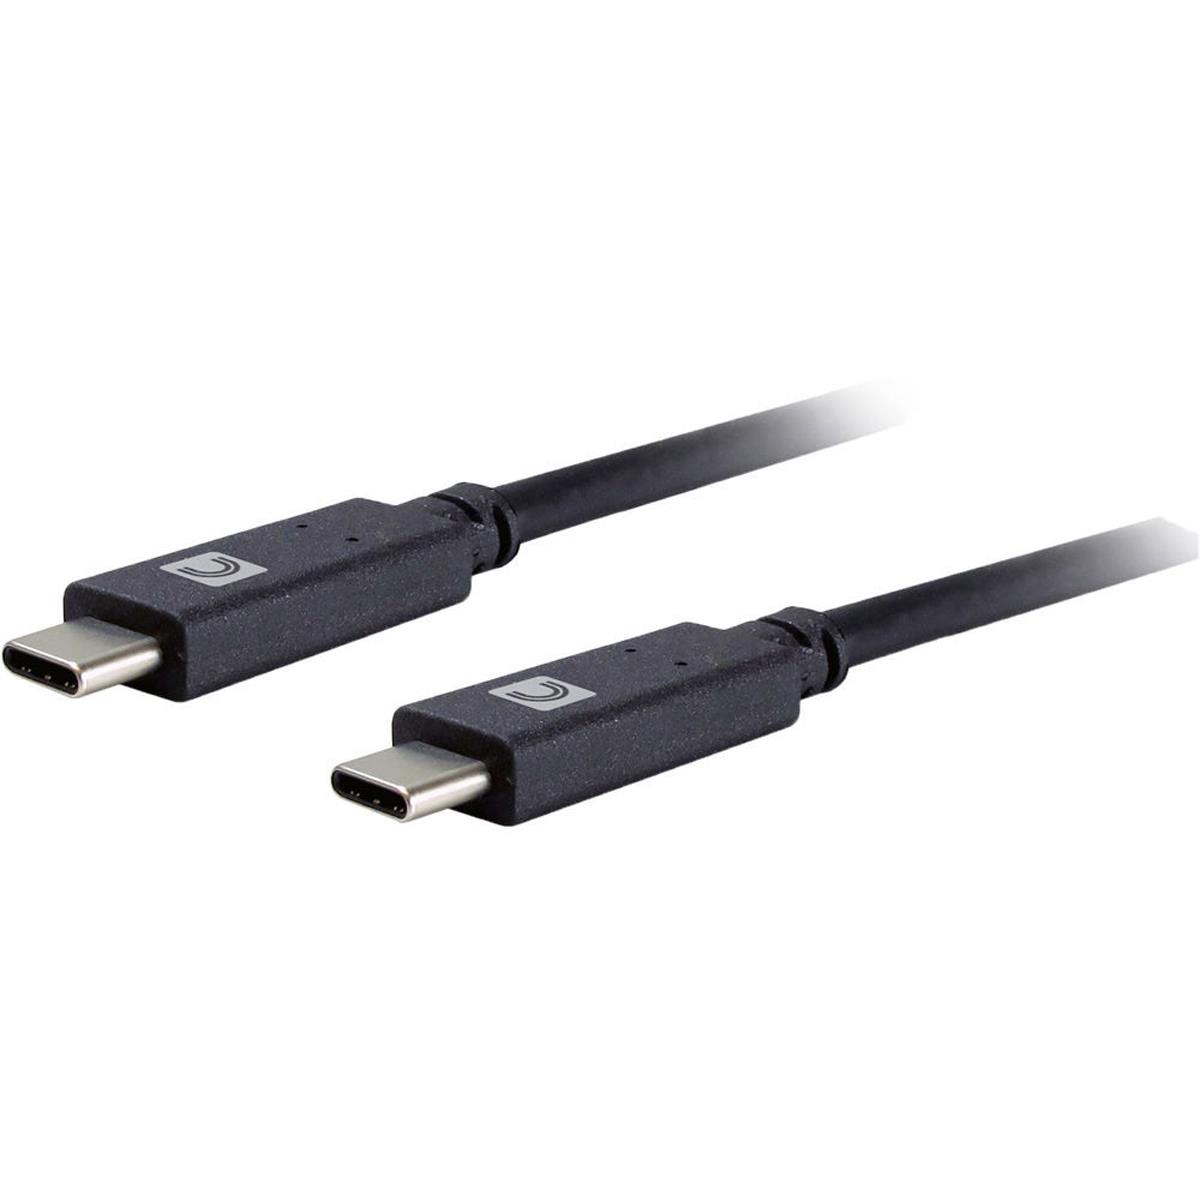 Image of Comprehensive USB 3.1 Gen 2 Type-C Male to Type-C Male Cable